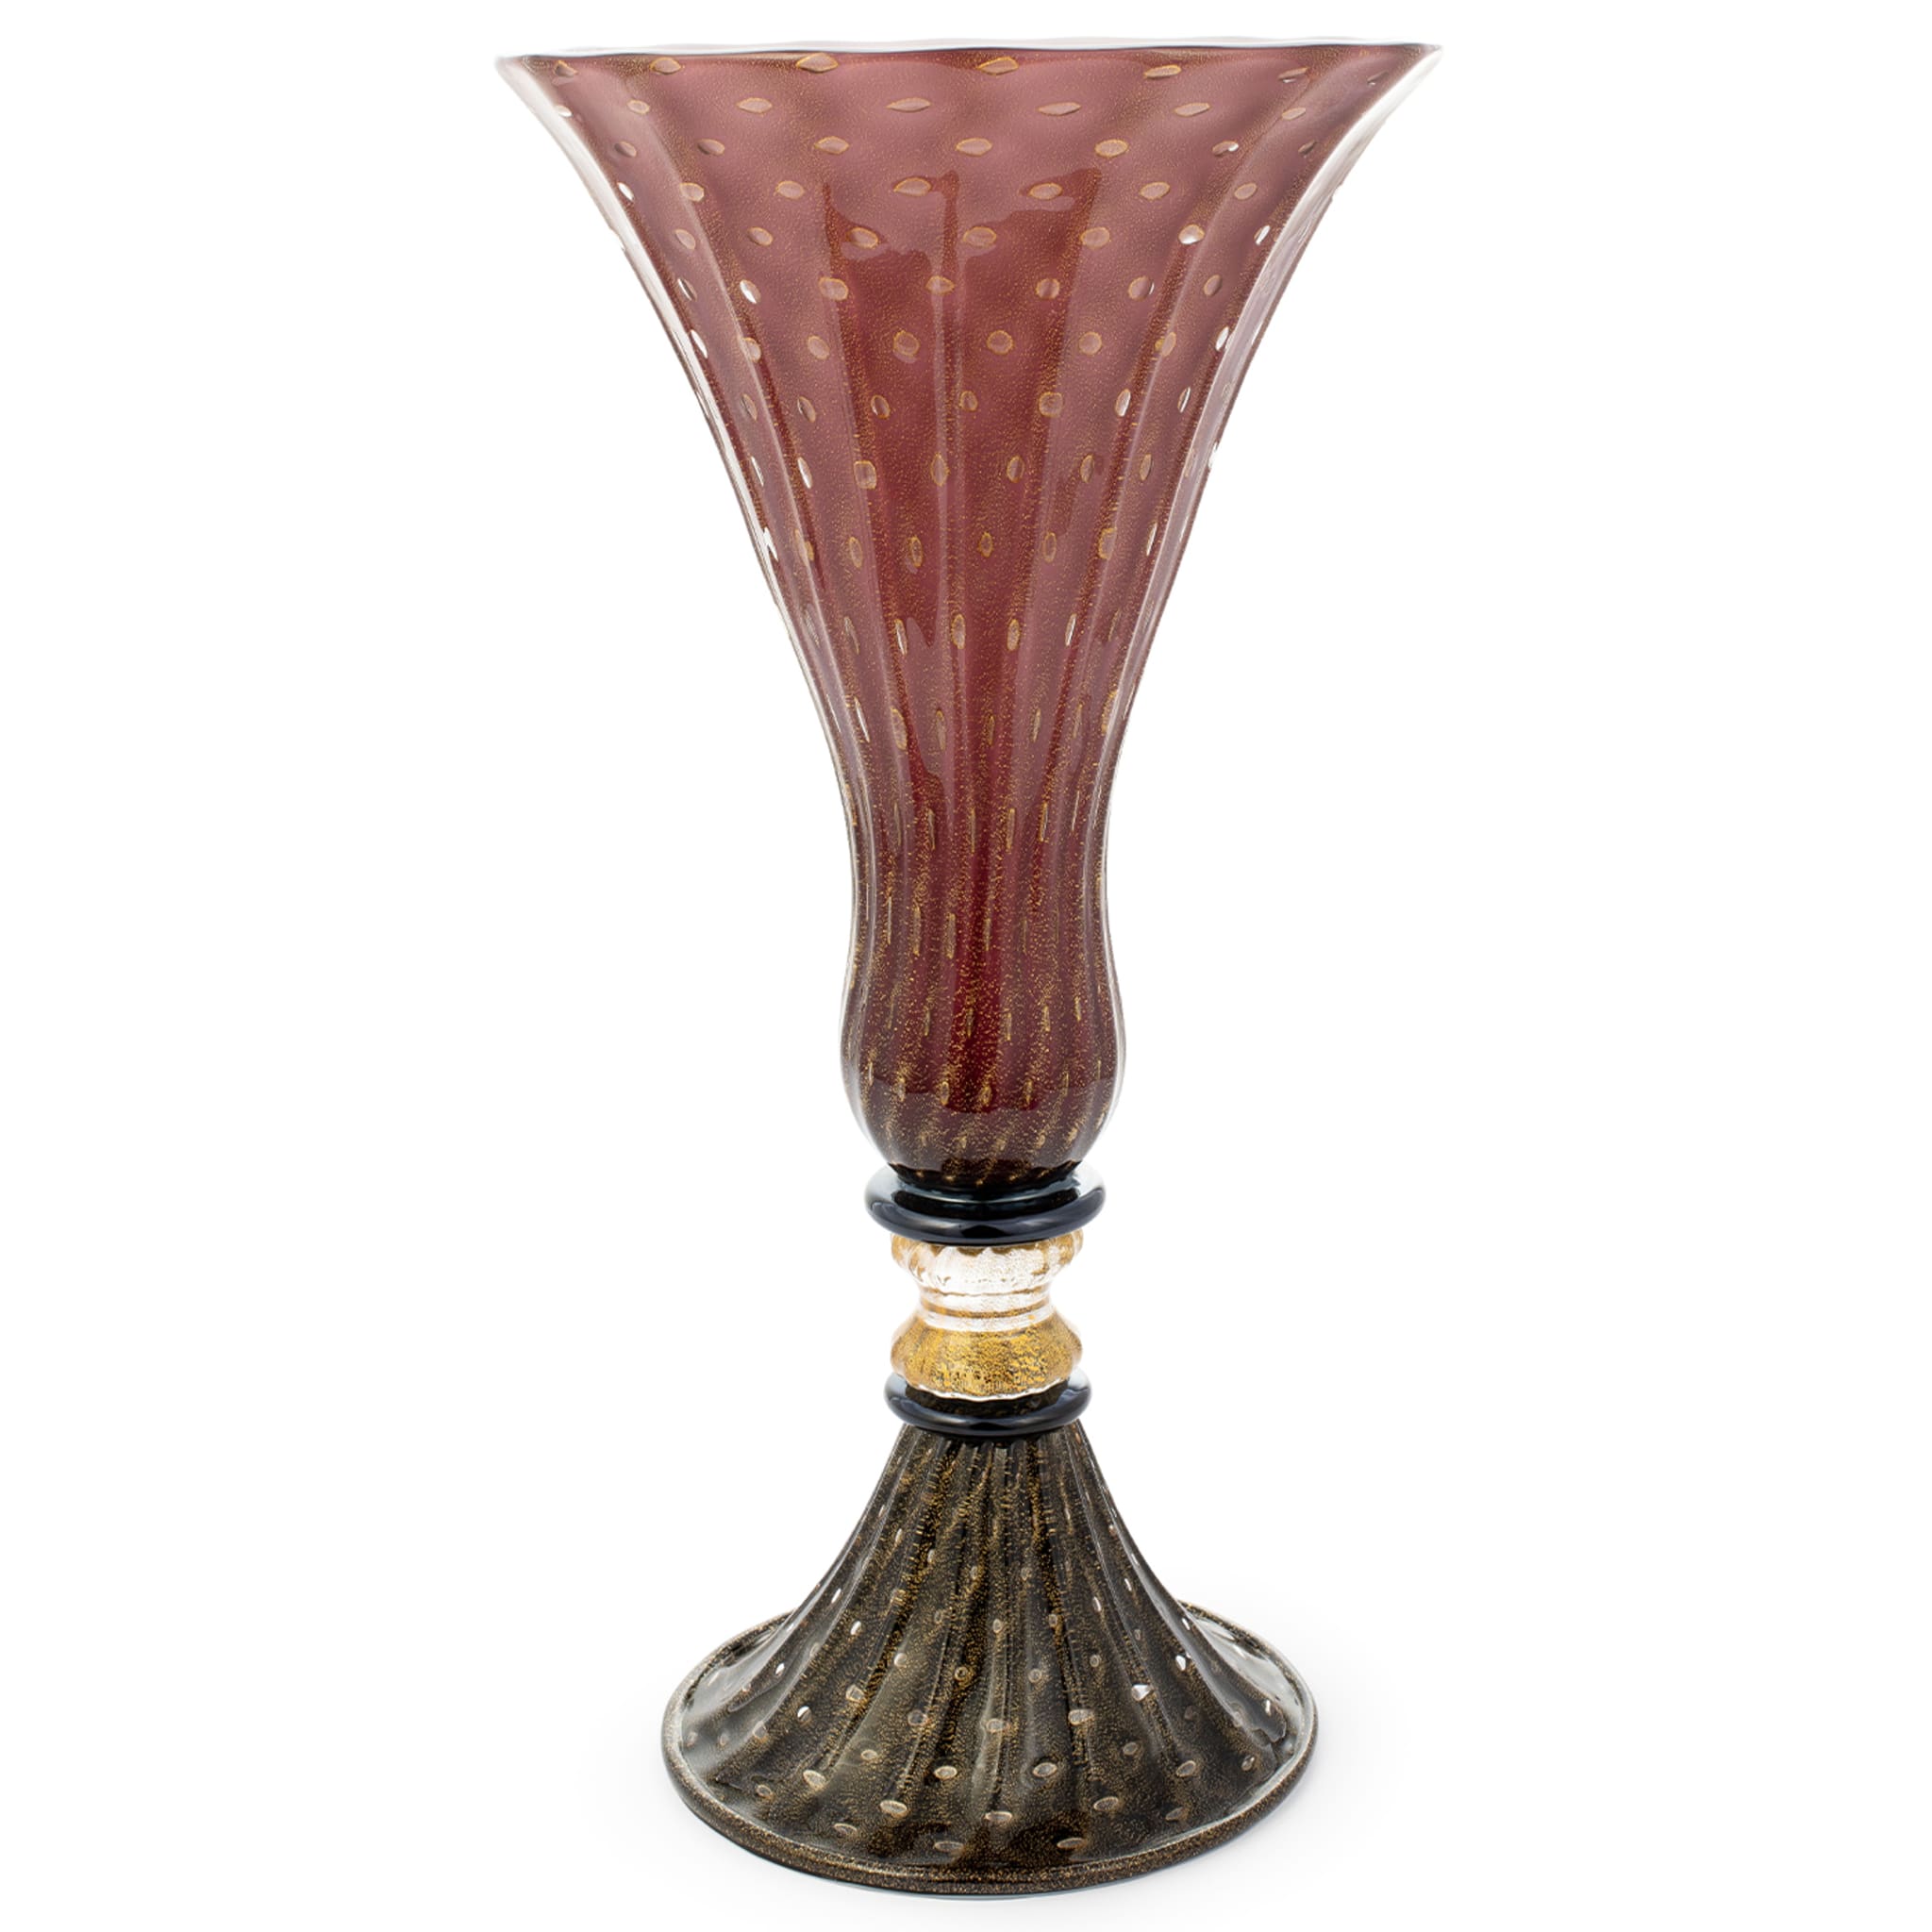 Stmtrub Ruby & Gold Footed Vase - Alternative view 1